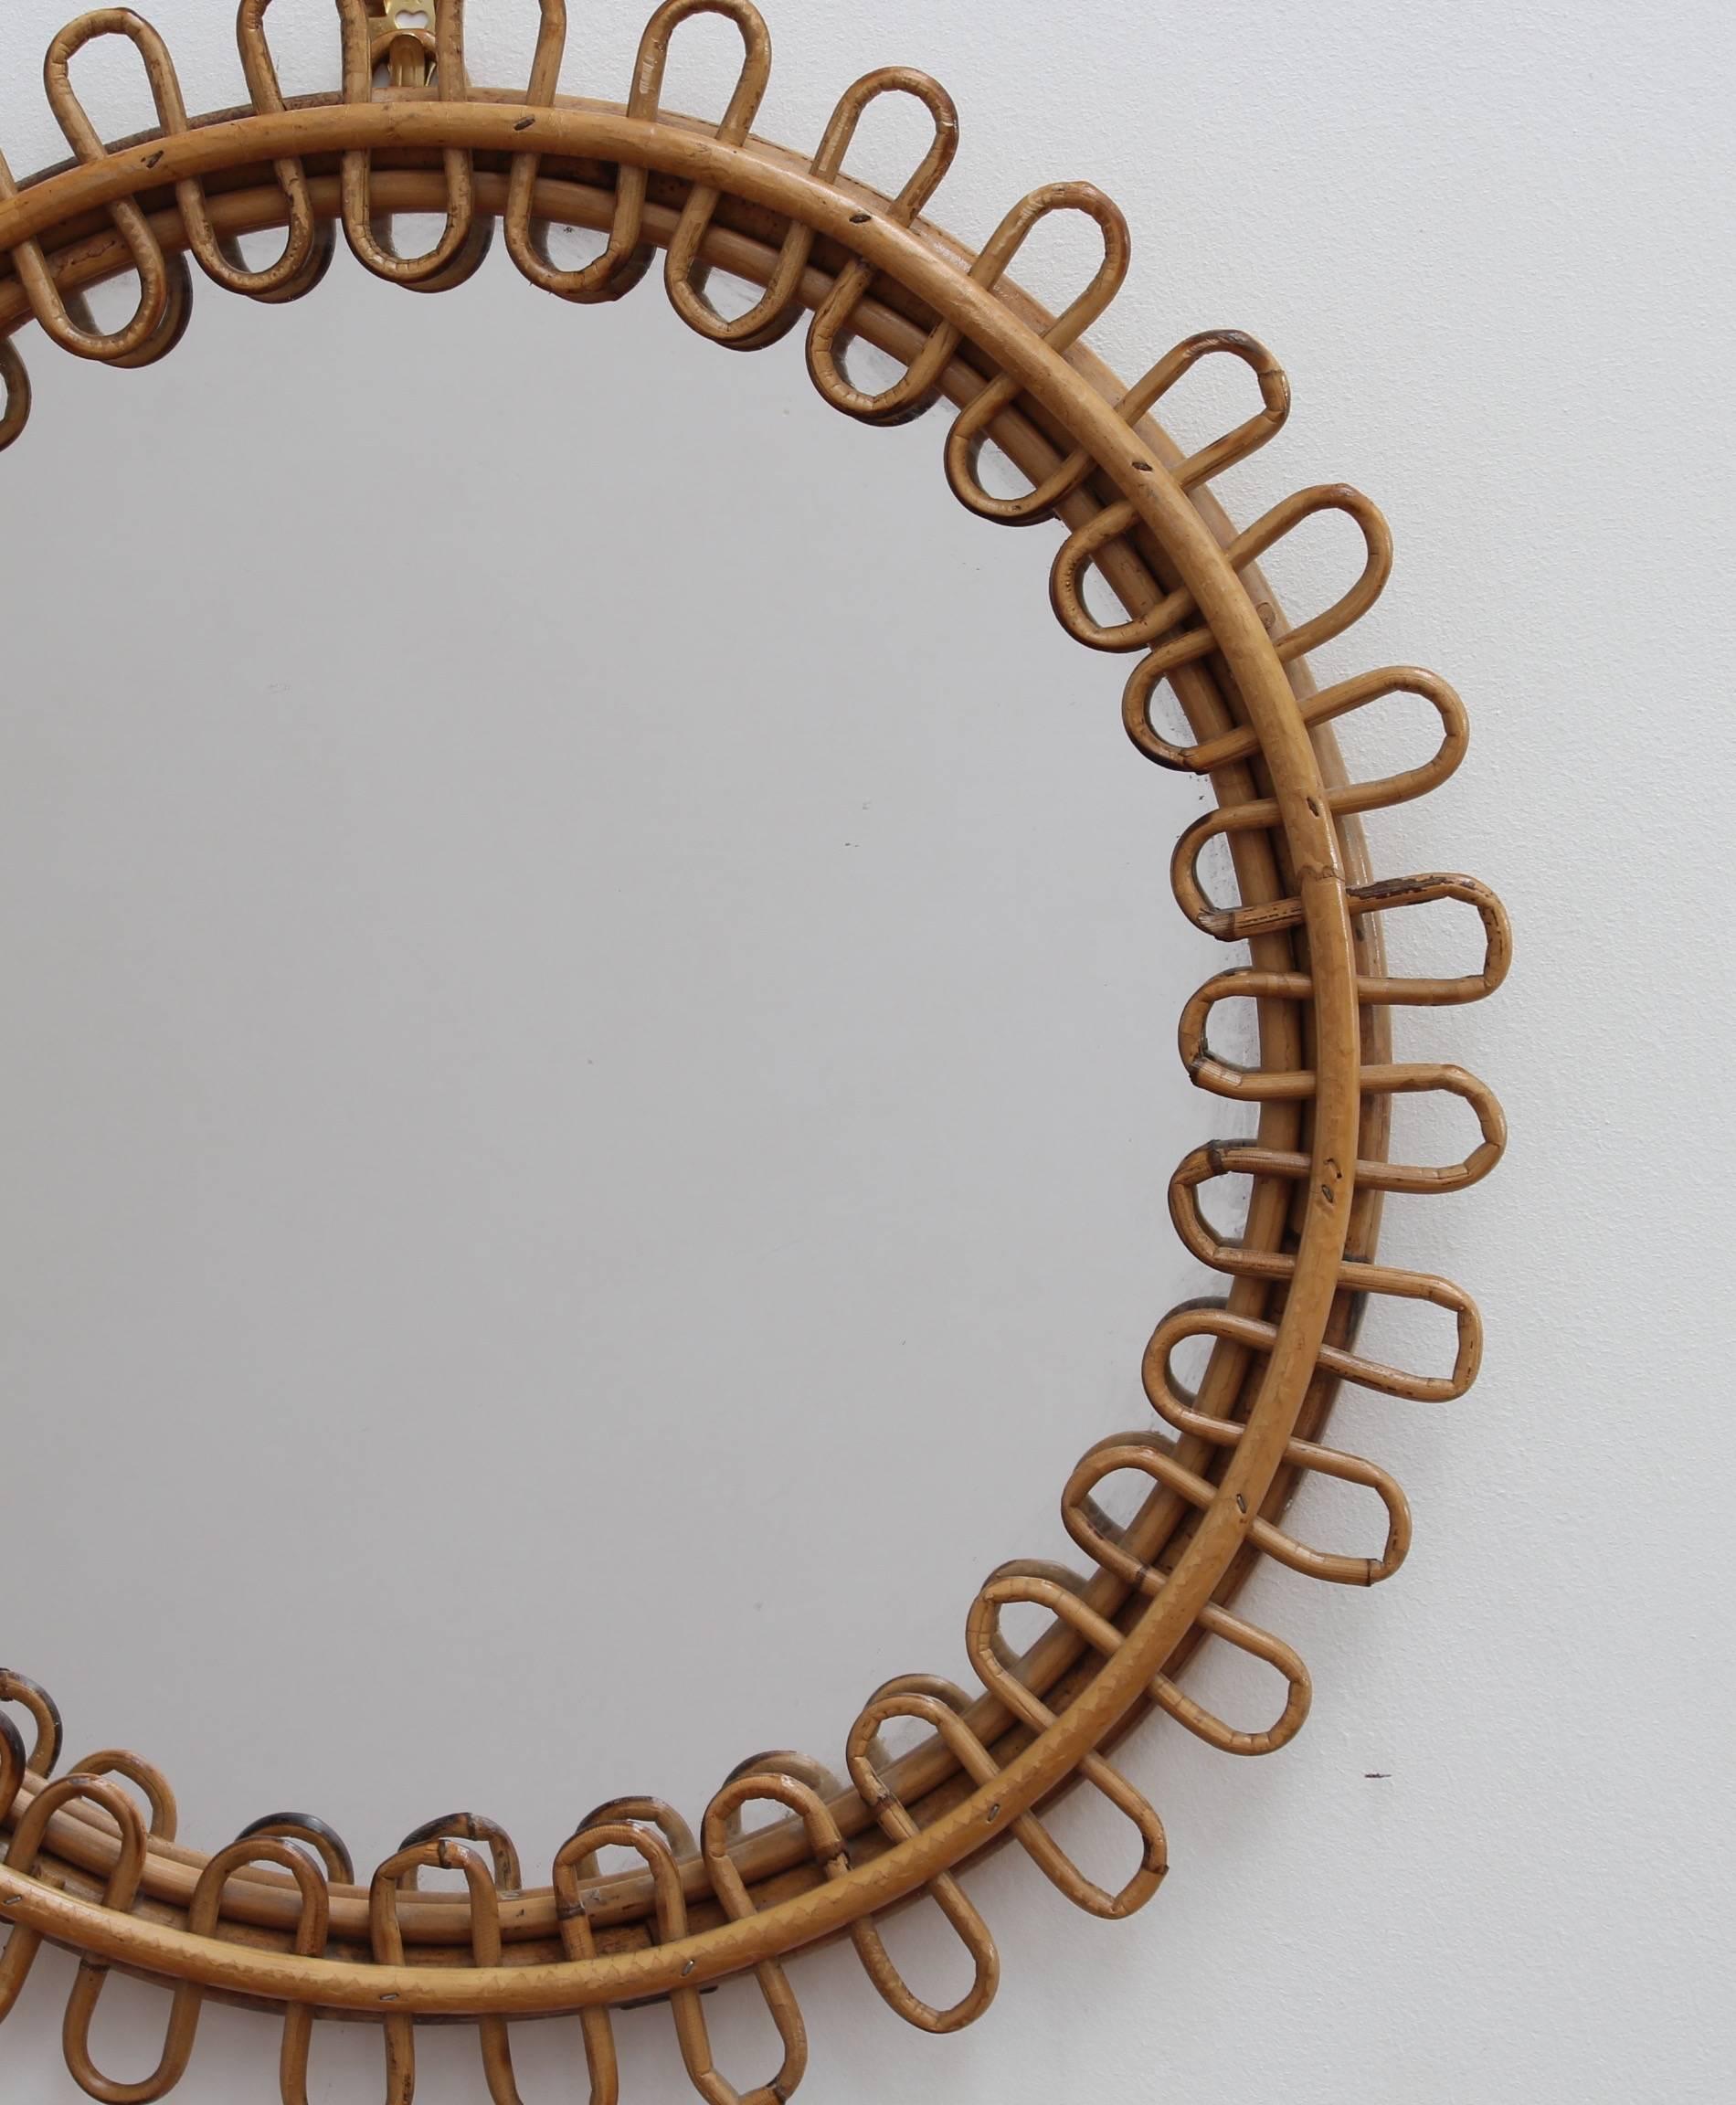 Midcentury Italian rattan and bamboo mirror, (circa 1960s). Chic and stylish circular mirror with bamboo frame and undulating rattan border. Let the sunshine in to your home and your life. In excellent vintage condition commensurate with its age and